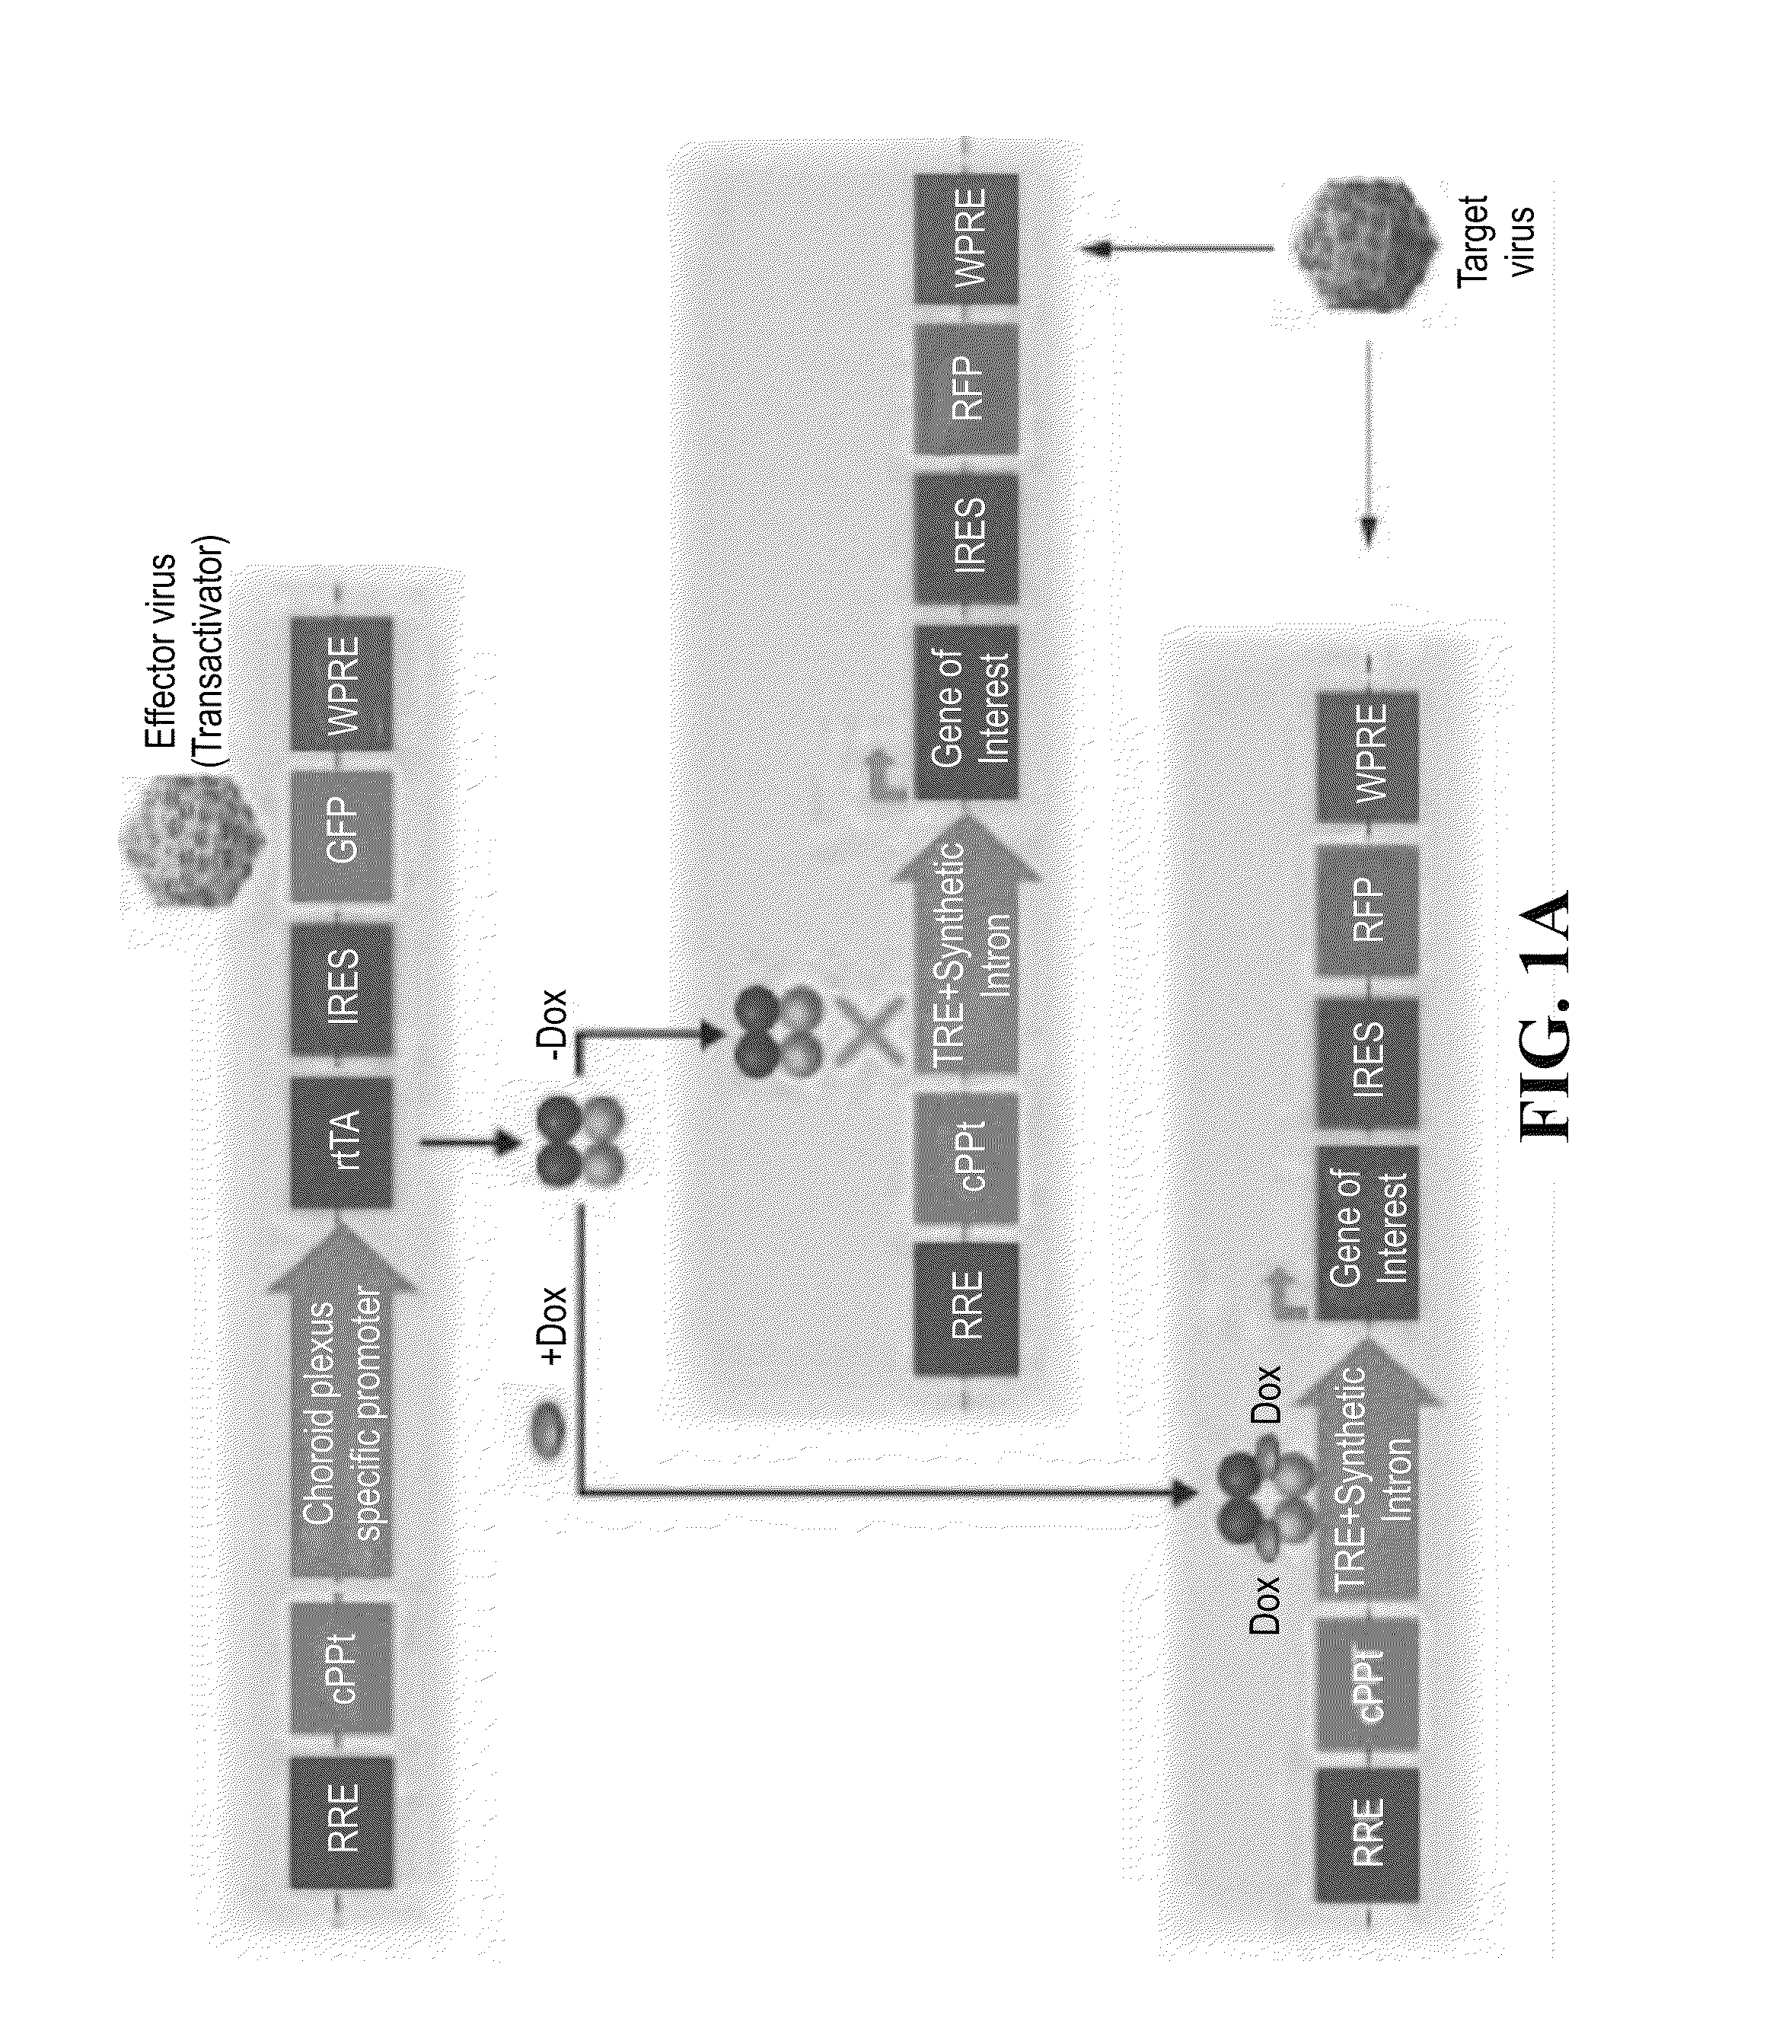 Methods of expressing a polypeptide in the brain and nucleic acid constructs capable of same